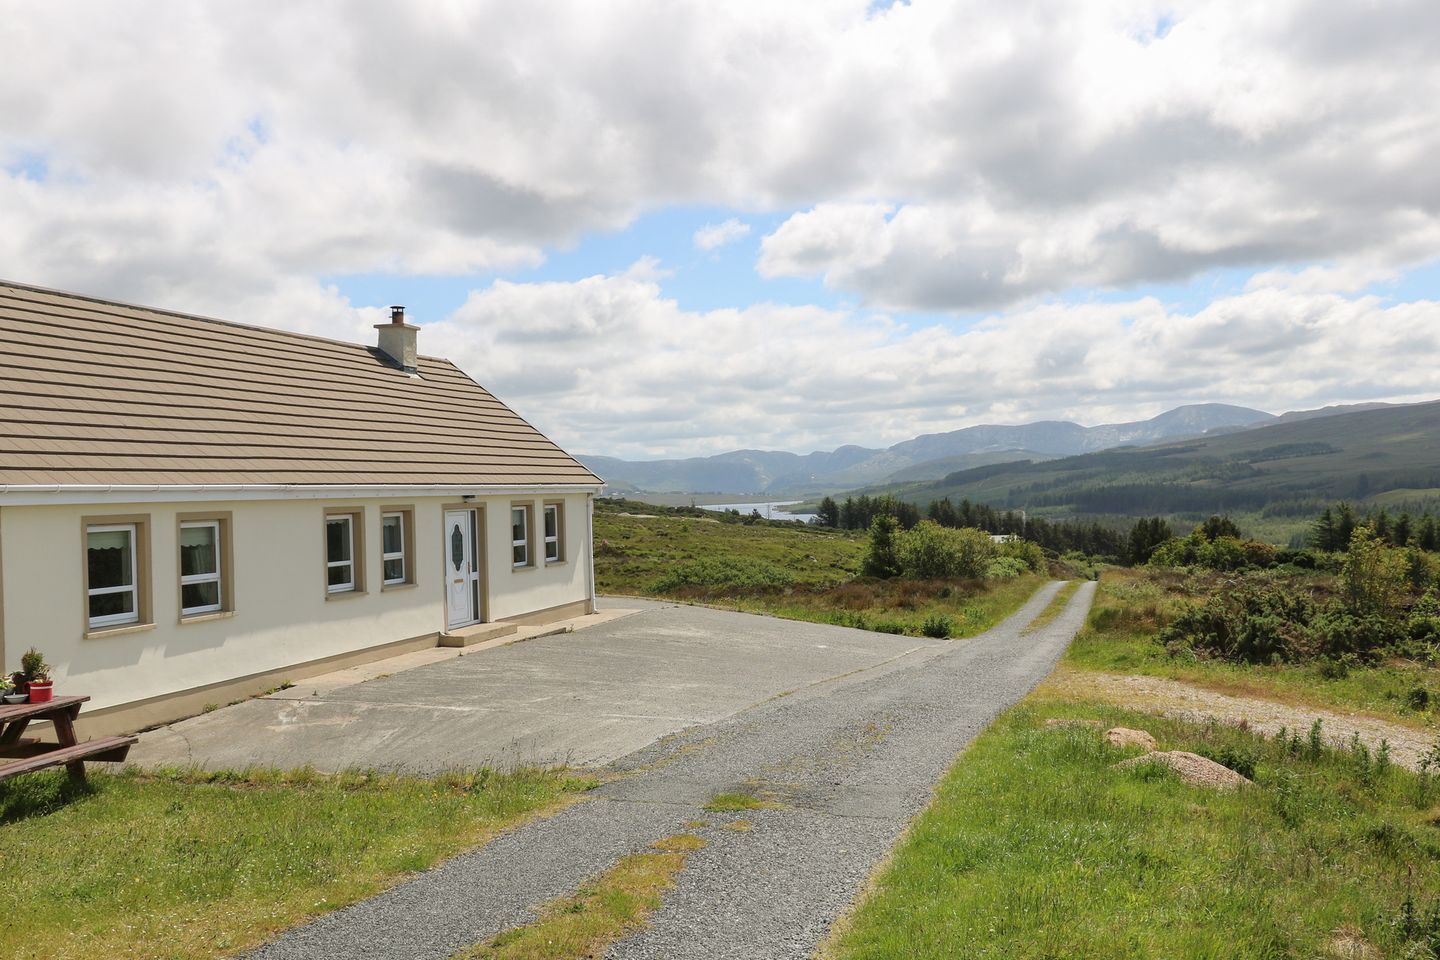 Ref. 1049645 Errigal View House, Meenderrygamph, Gweedore, Co. Donegal